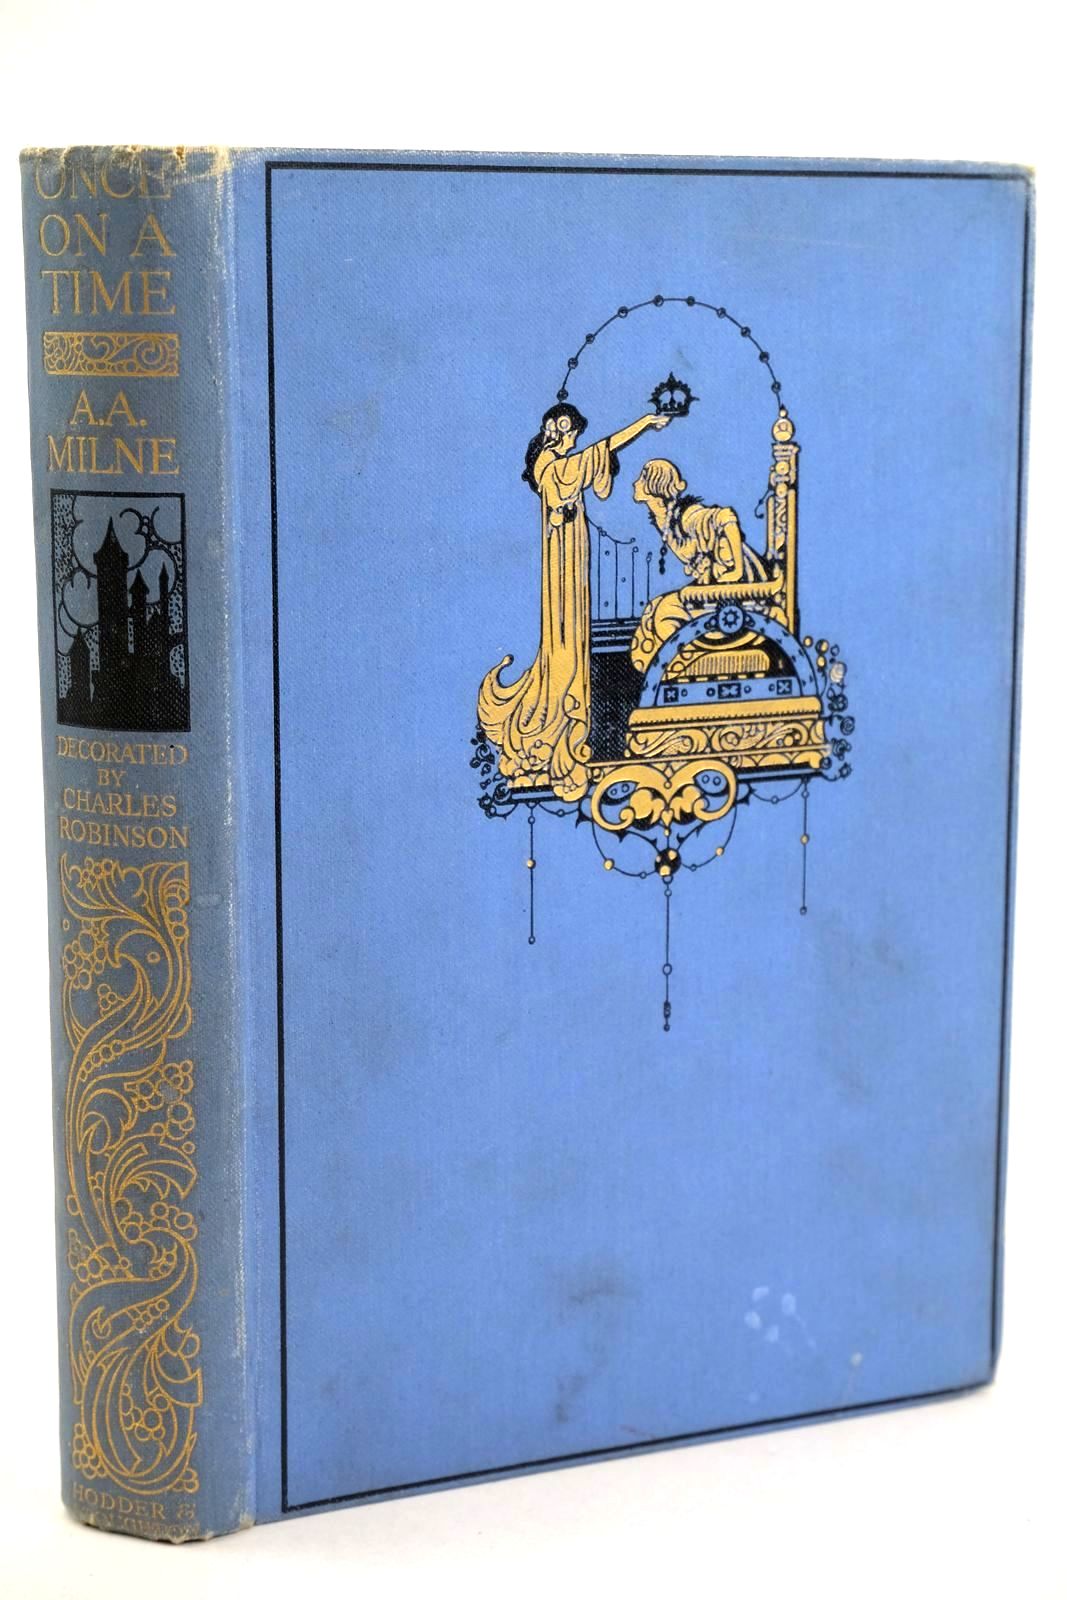 Photo of ONCE ON A TIME written by Milne, A.A. illustrated by Robinson, Charles published by Hodder &amp; Stoughton (STOCK CODE: 1318903)  for sale by Stella & Rose's Books